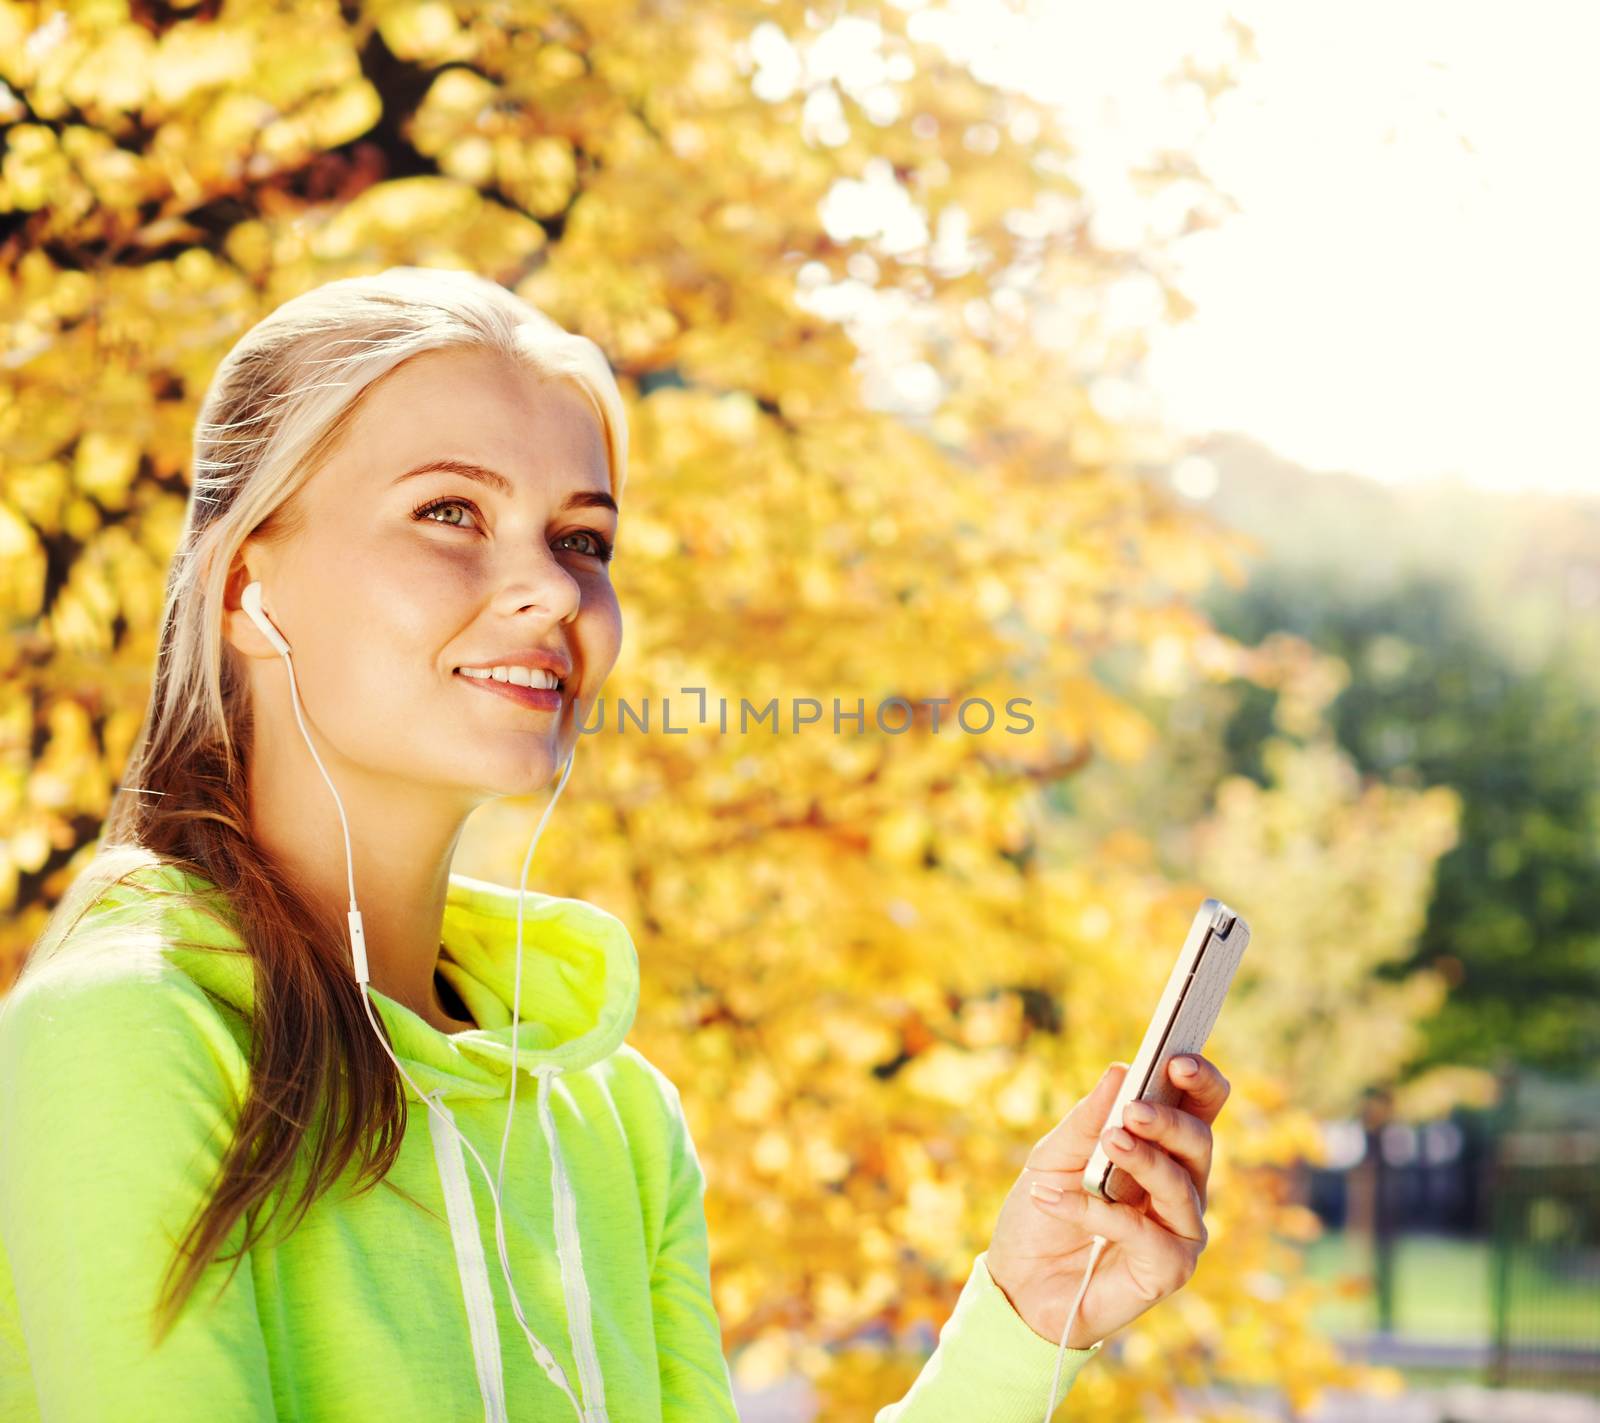 sport and lifestyle concept - woman doing sports and listening to music outdoors